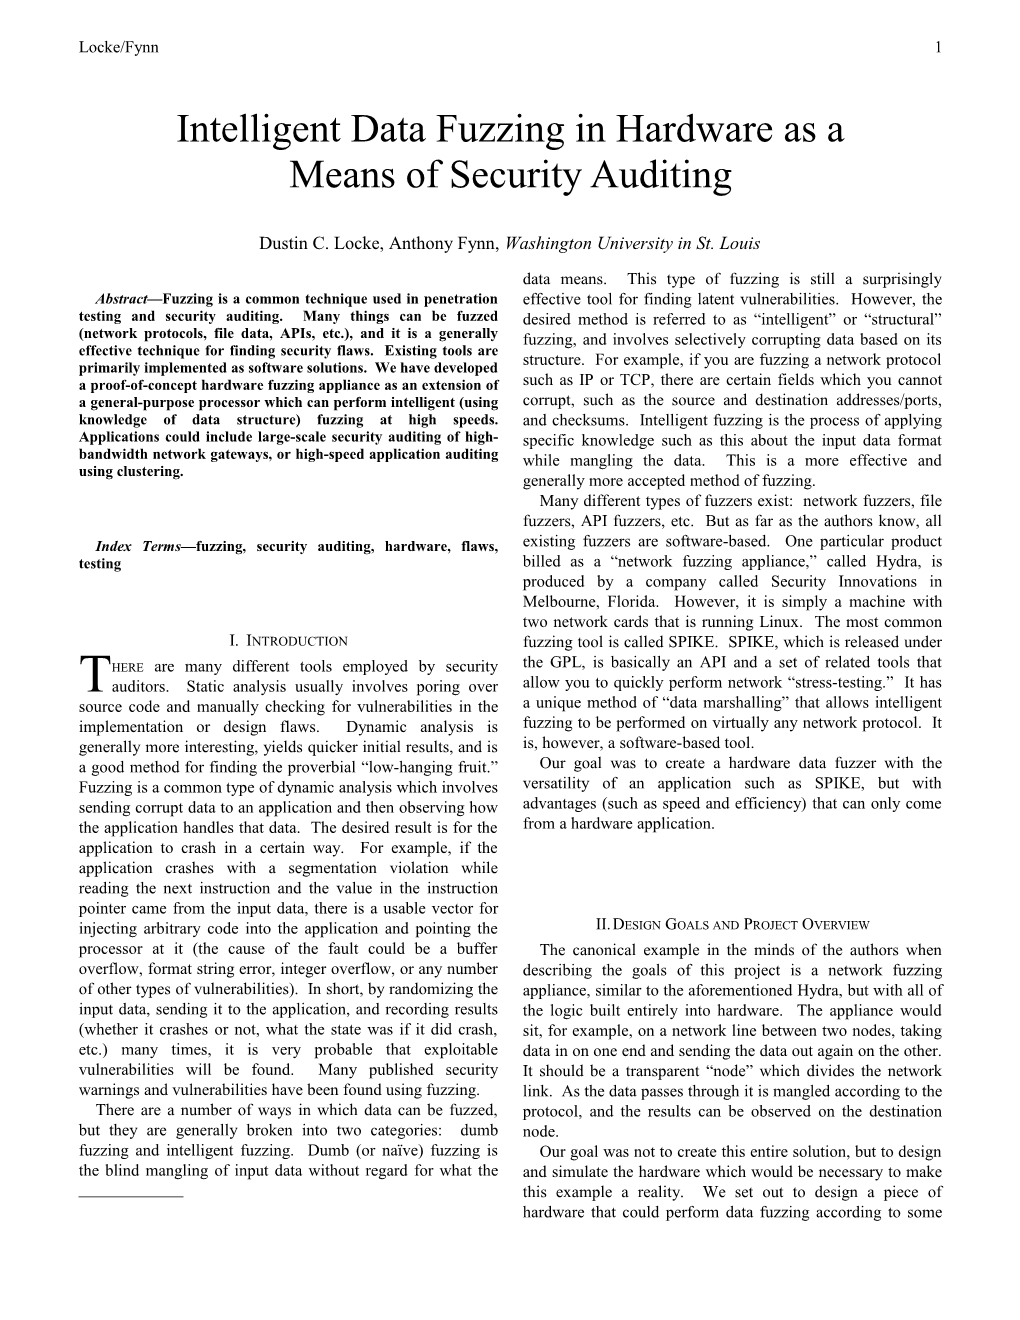 Intelligent Data Fuzzing in Hardware As a Means of Security Auditing